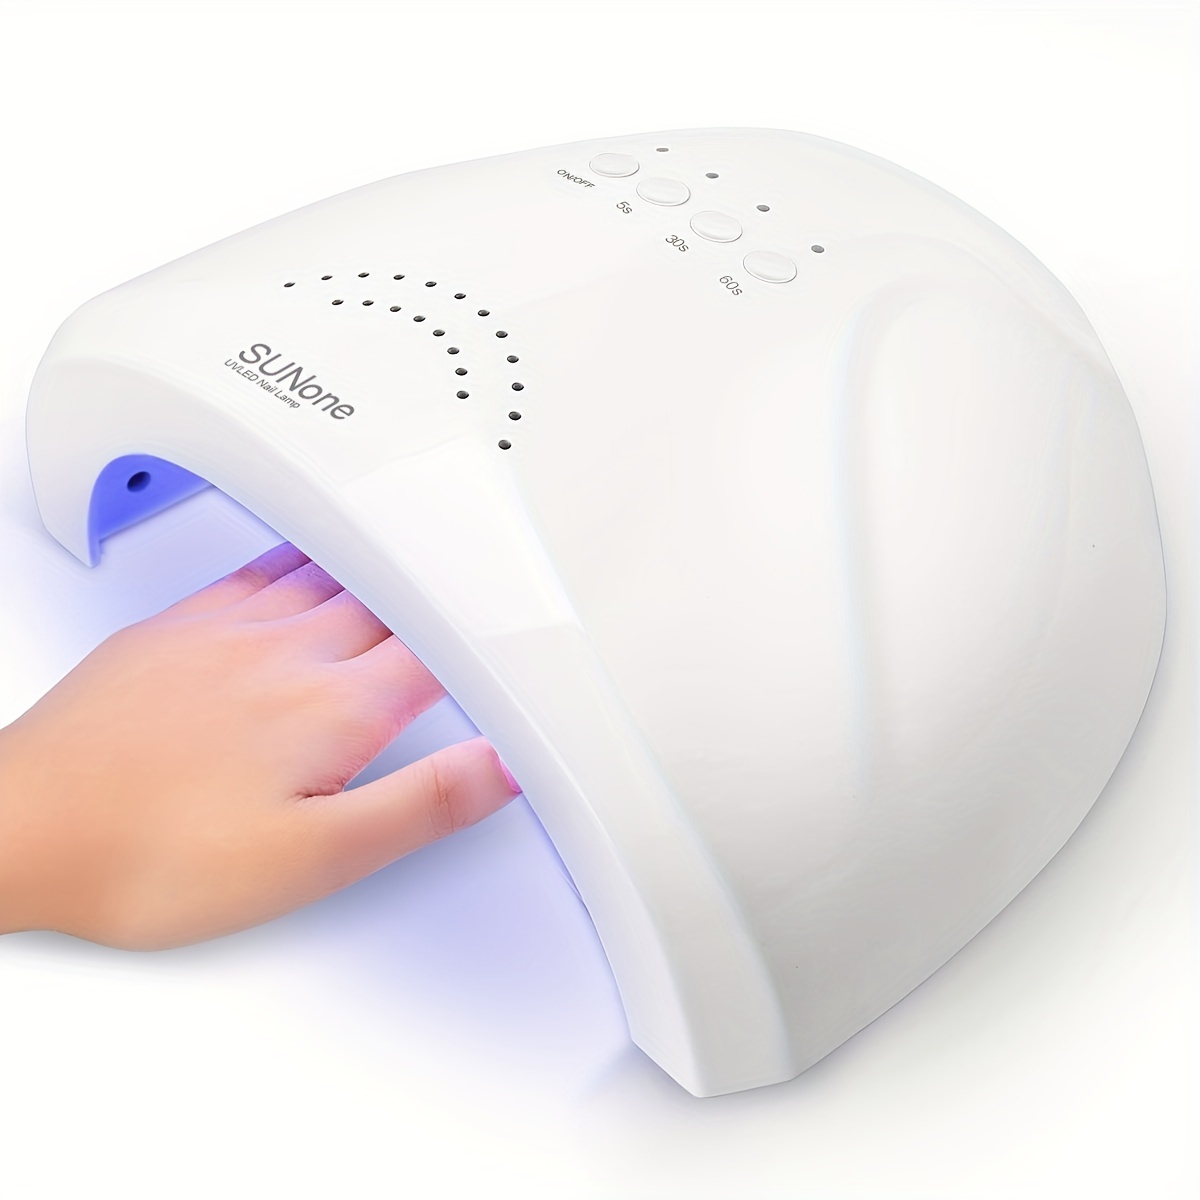 

Professional Uv Led Nail Lamp, Usb Nail Dryer For Gel Polish Acrylic Nails, Infrared Automatic Sensing, Sunlight Simulation Design, Salon Quality Manicure Curing Light With Timer